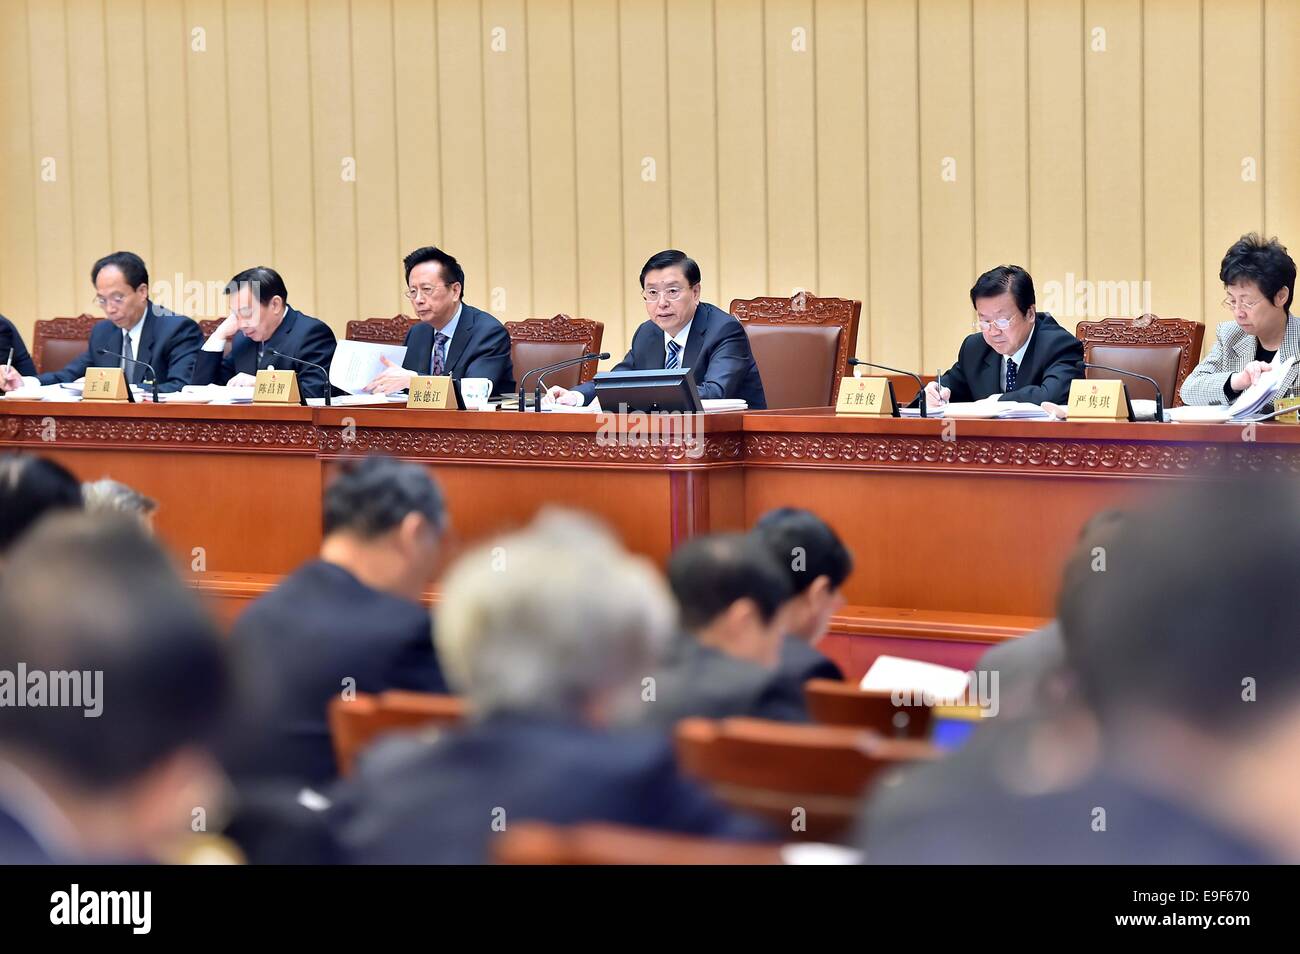 Beijing, China. 27th Oct, 2014. Zhang Dejiang (3rd R back), chairman of the Standing Committee of the National People's Congress (NPC), presides over the 11th meeting of the 12th NPC Standing Committee in Beijing, China, Oct. 27, 2014. Credit:  Li Tao/Xinhua/Alamy Live News Stock Photo